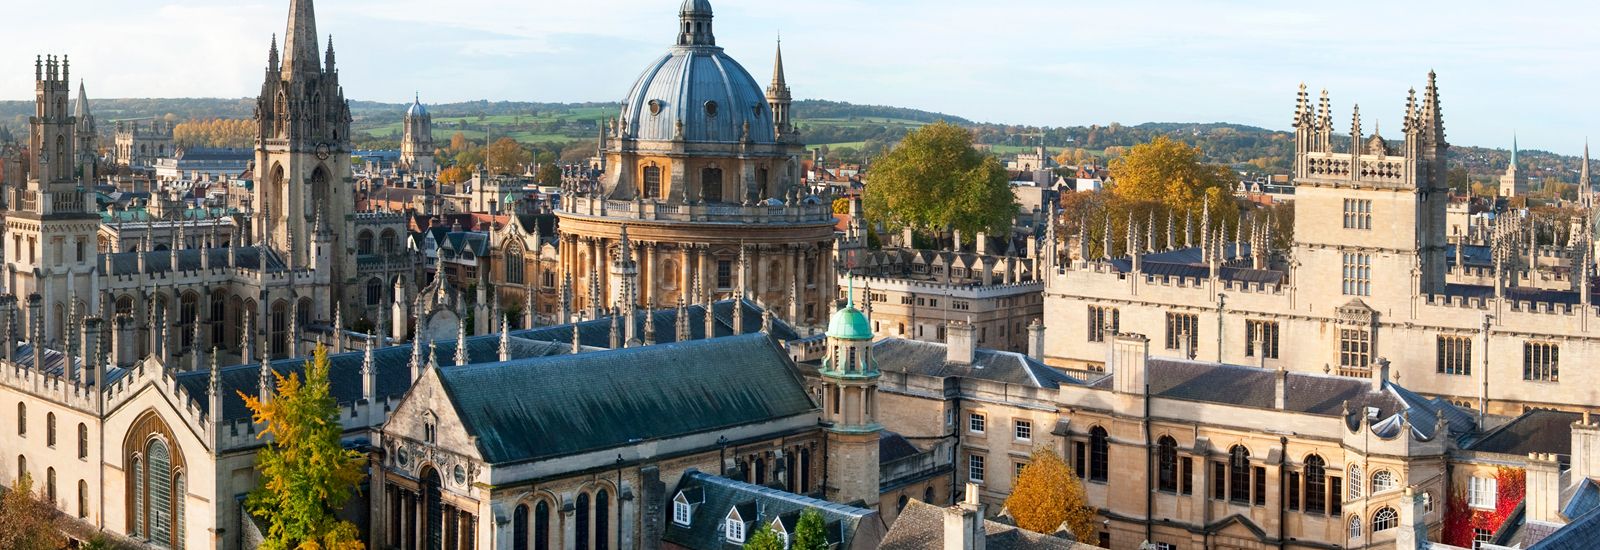 Colleges | University of Oxford